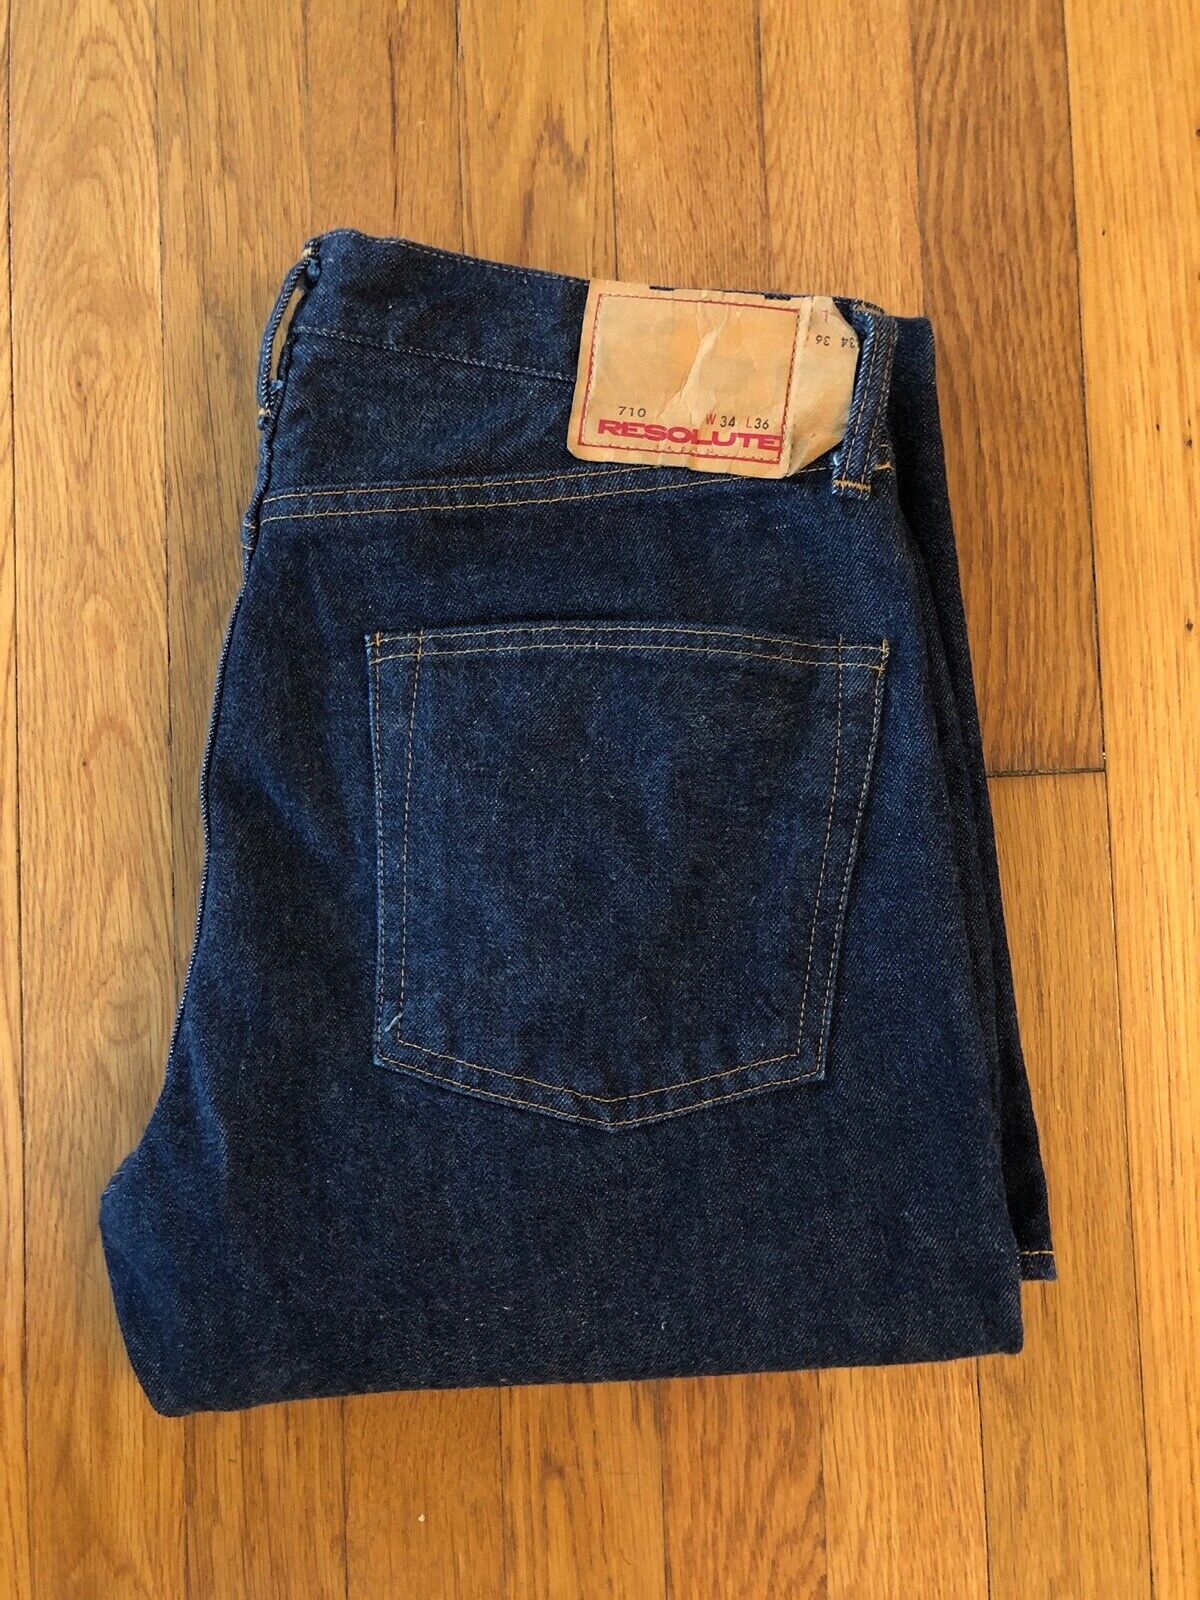 Resolute 710 Size 34